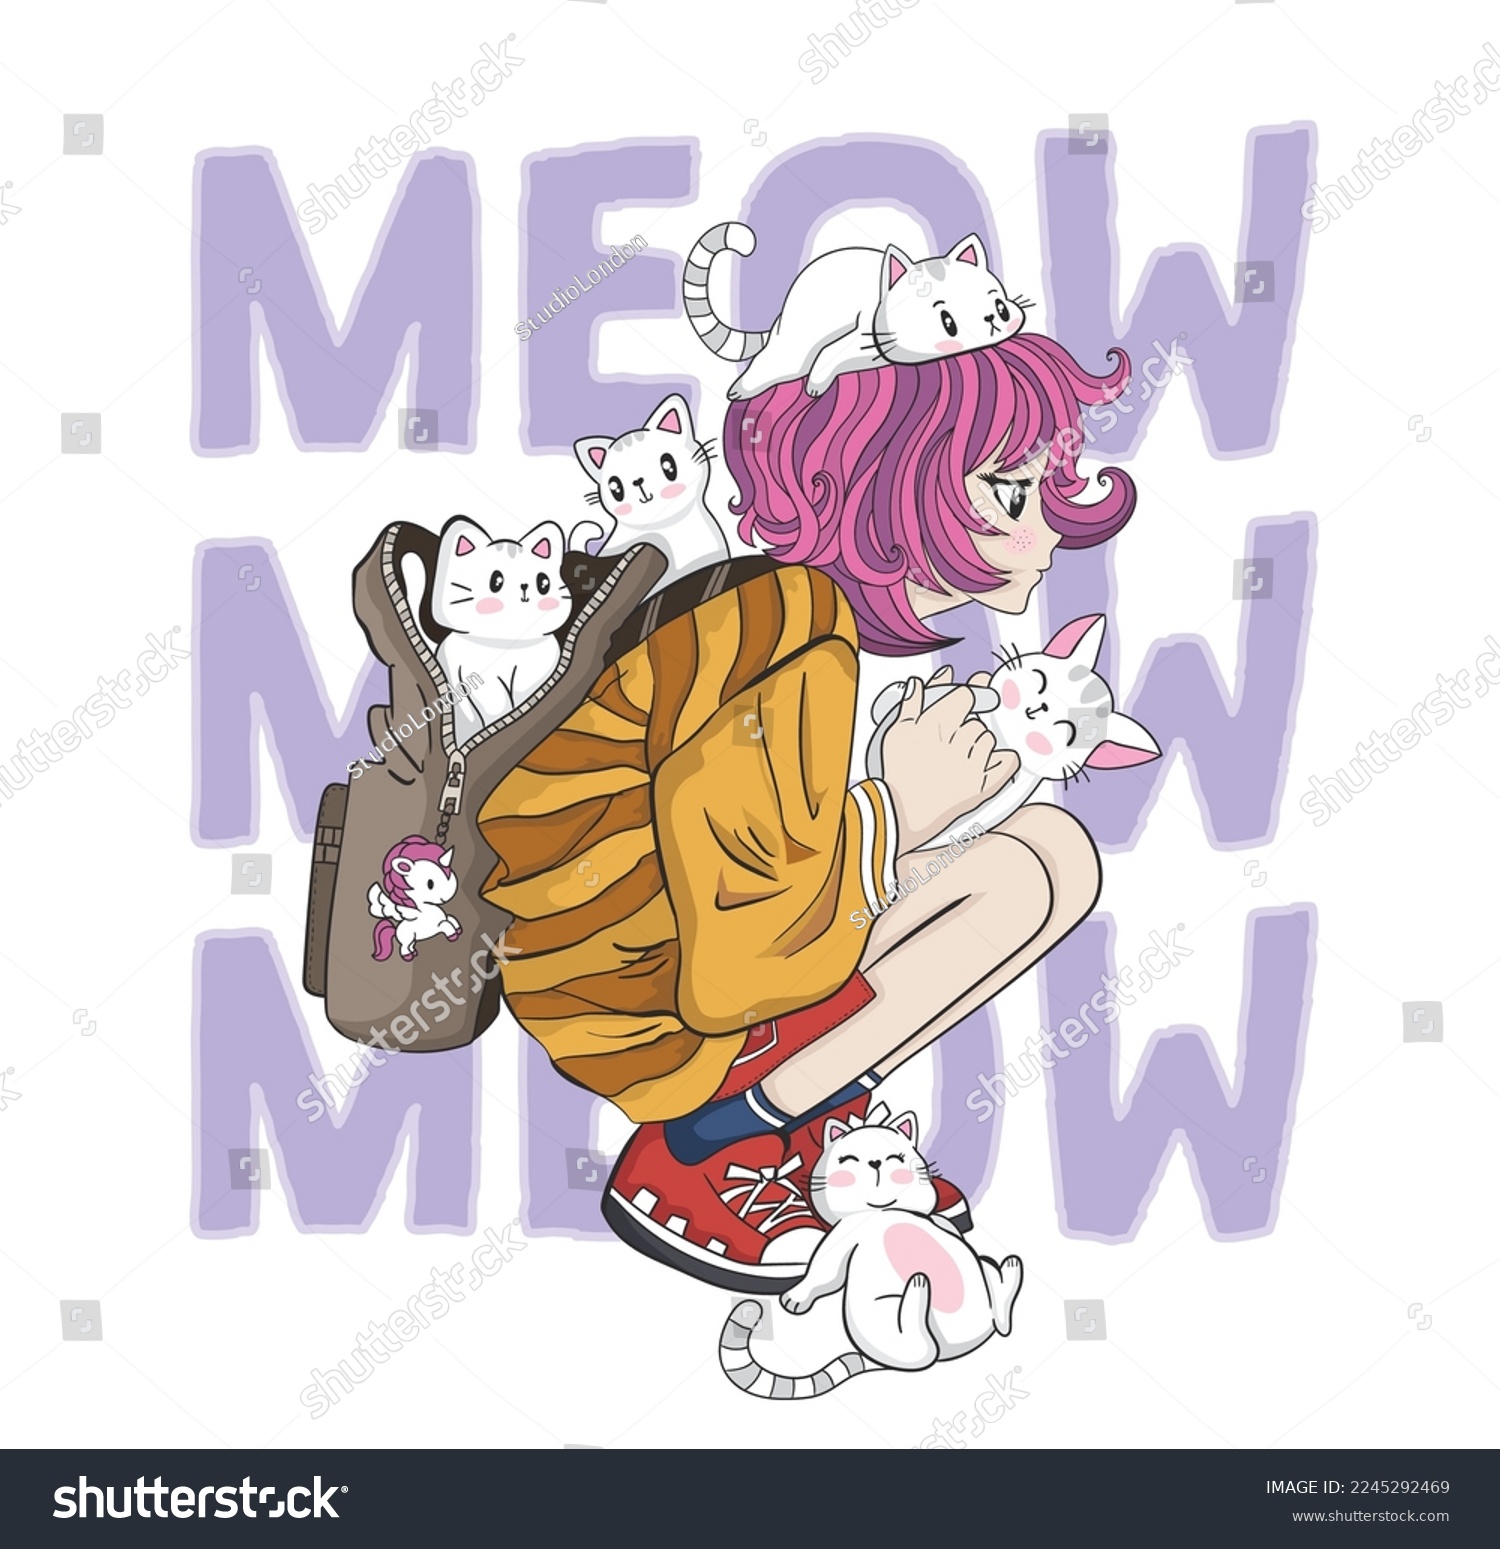 Anime Girl illustration with meow slogan.Vector graphic design for t-shirt.Manga girl character who loves little cute cats.Greeting card, poster,print, party concept,children, books,prints,wallpapers. #2245292469